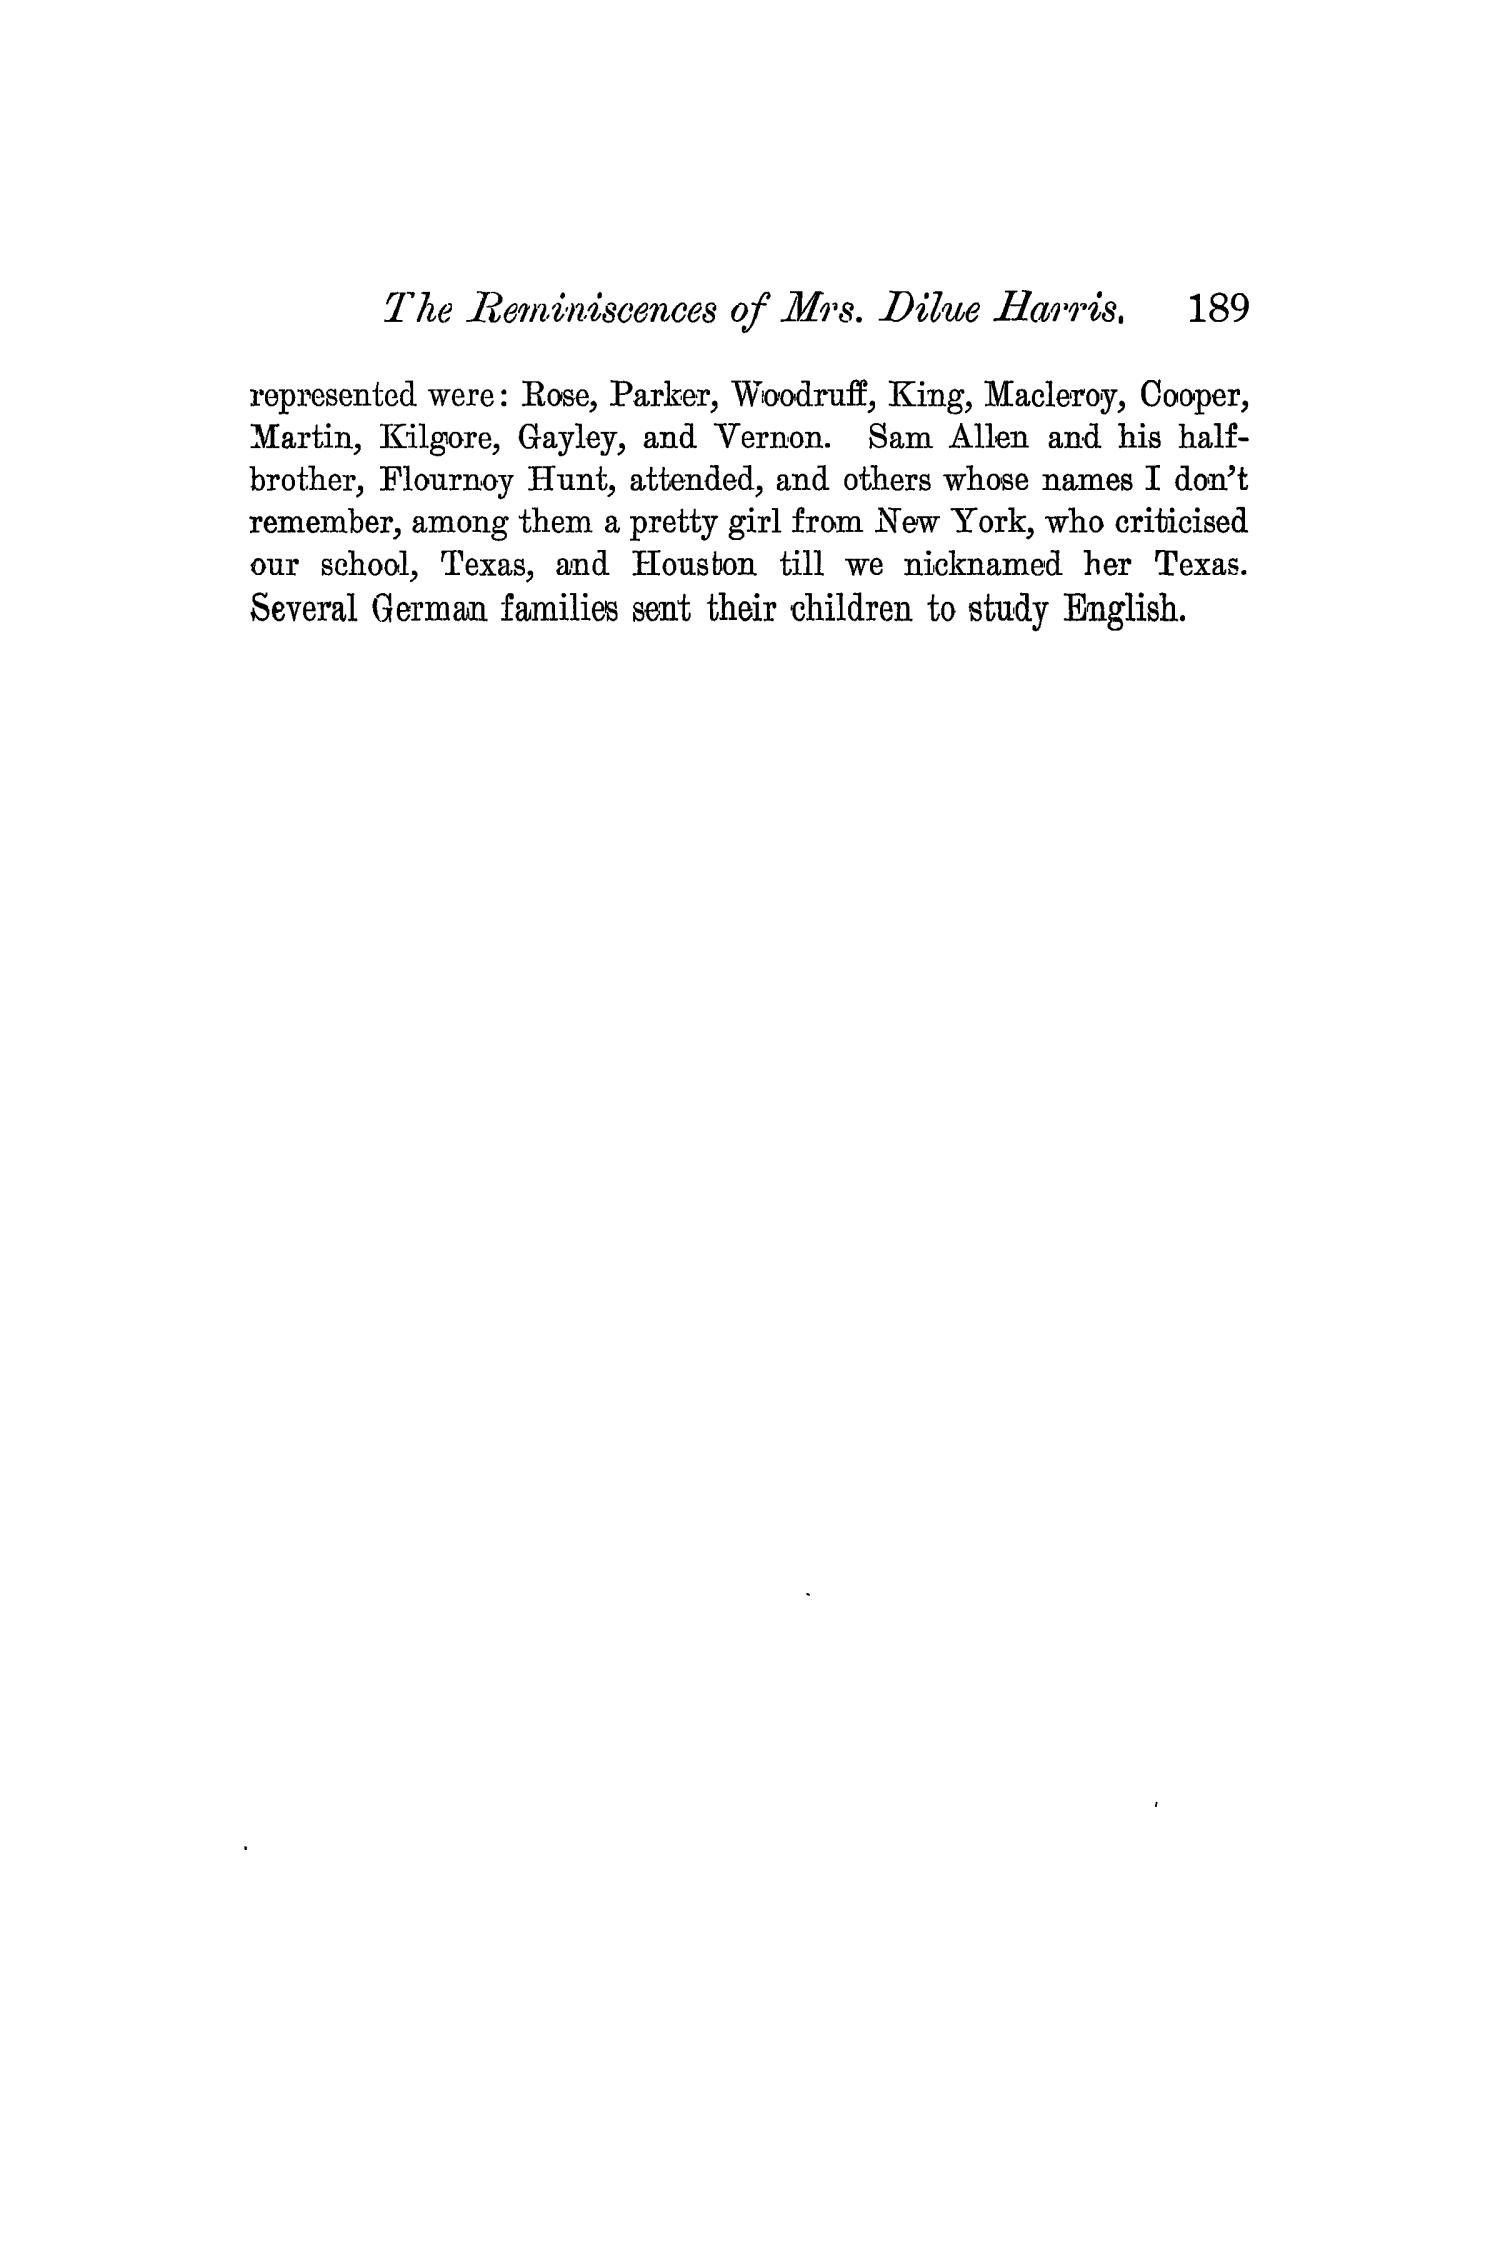 The Quarterly of the Texas State Historical Association, Volume 4, July 1900 - April, 1901
                                                
                                                    189
                                                